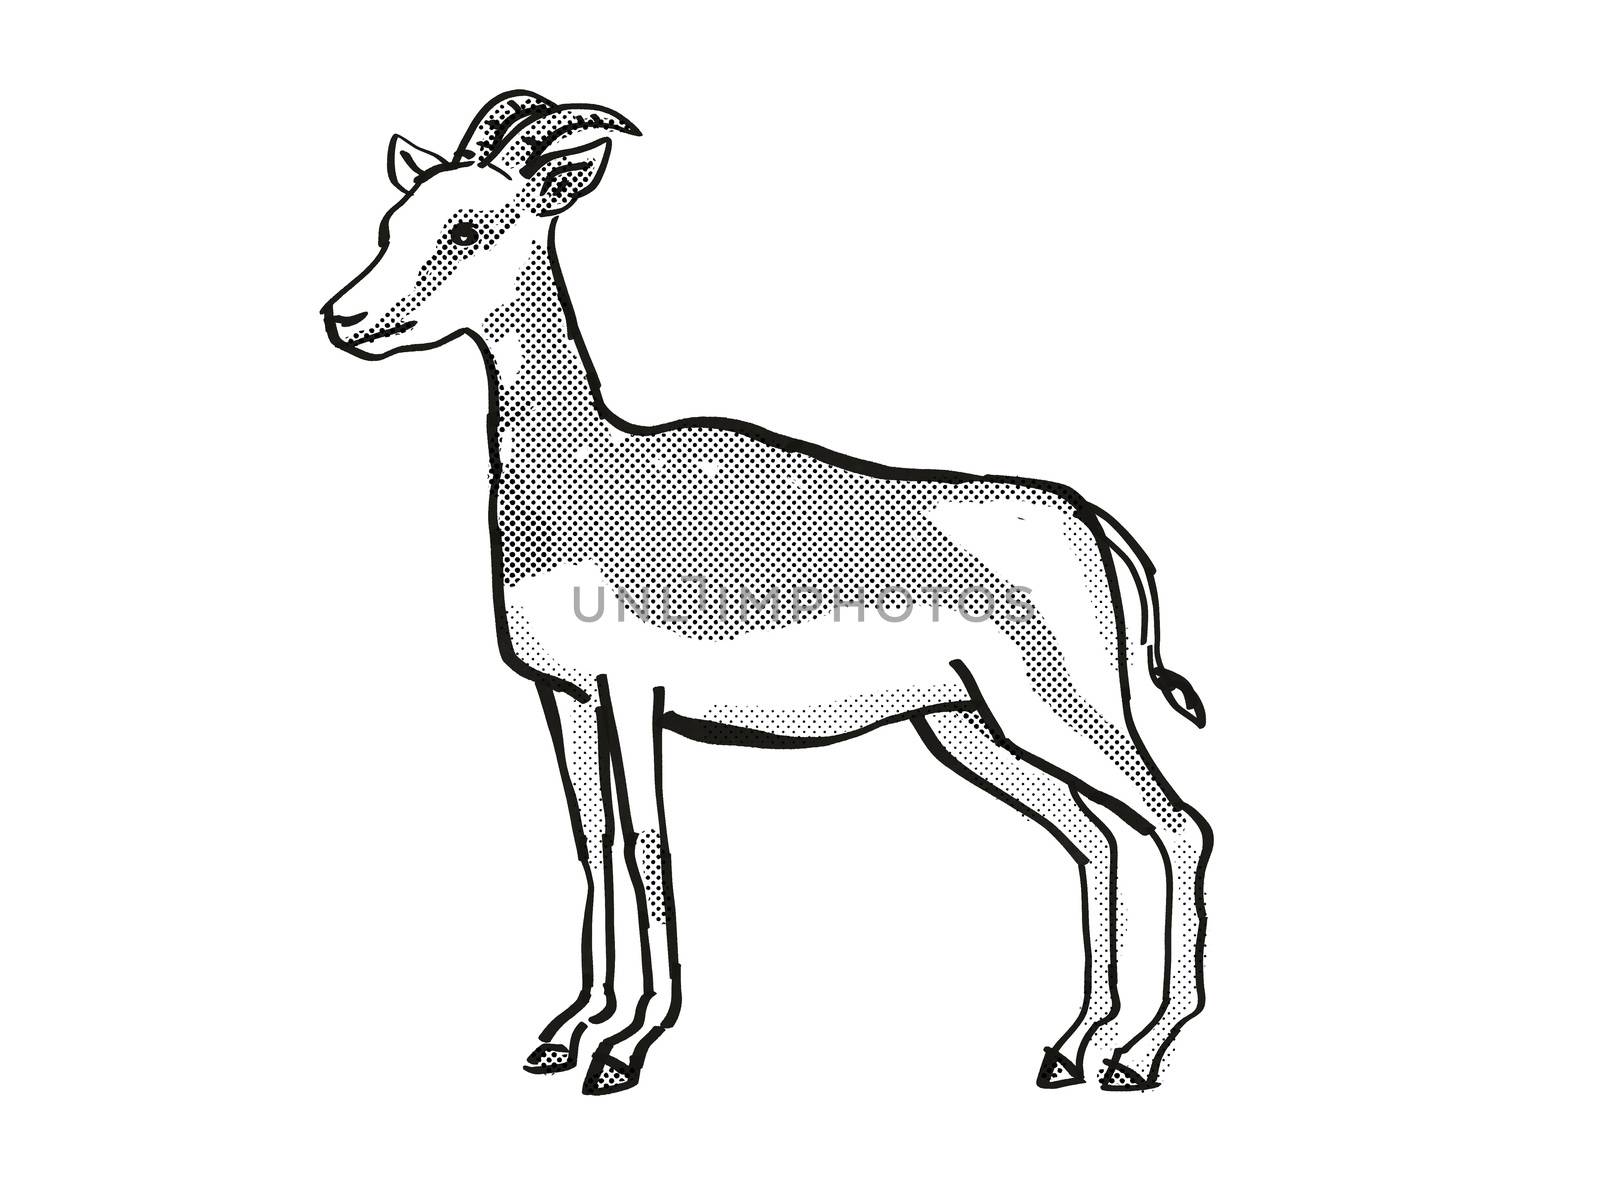 Retro cartoon line drawing style drawing of a Mhorr Gazelle, an endangered wildlife species on isolated background done in black and white full body.